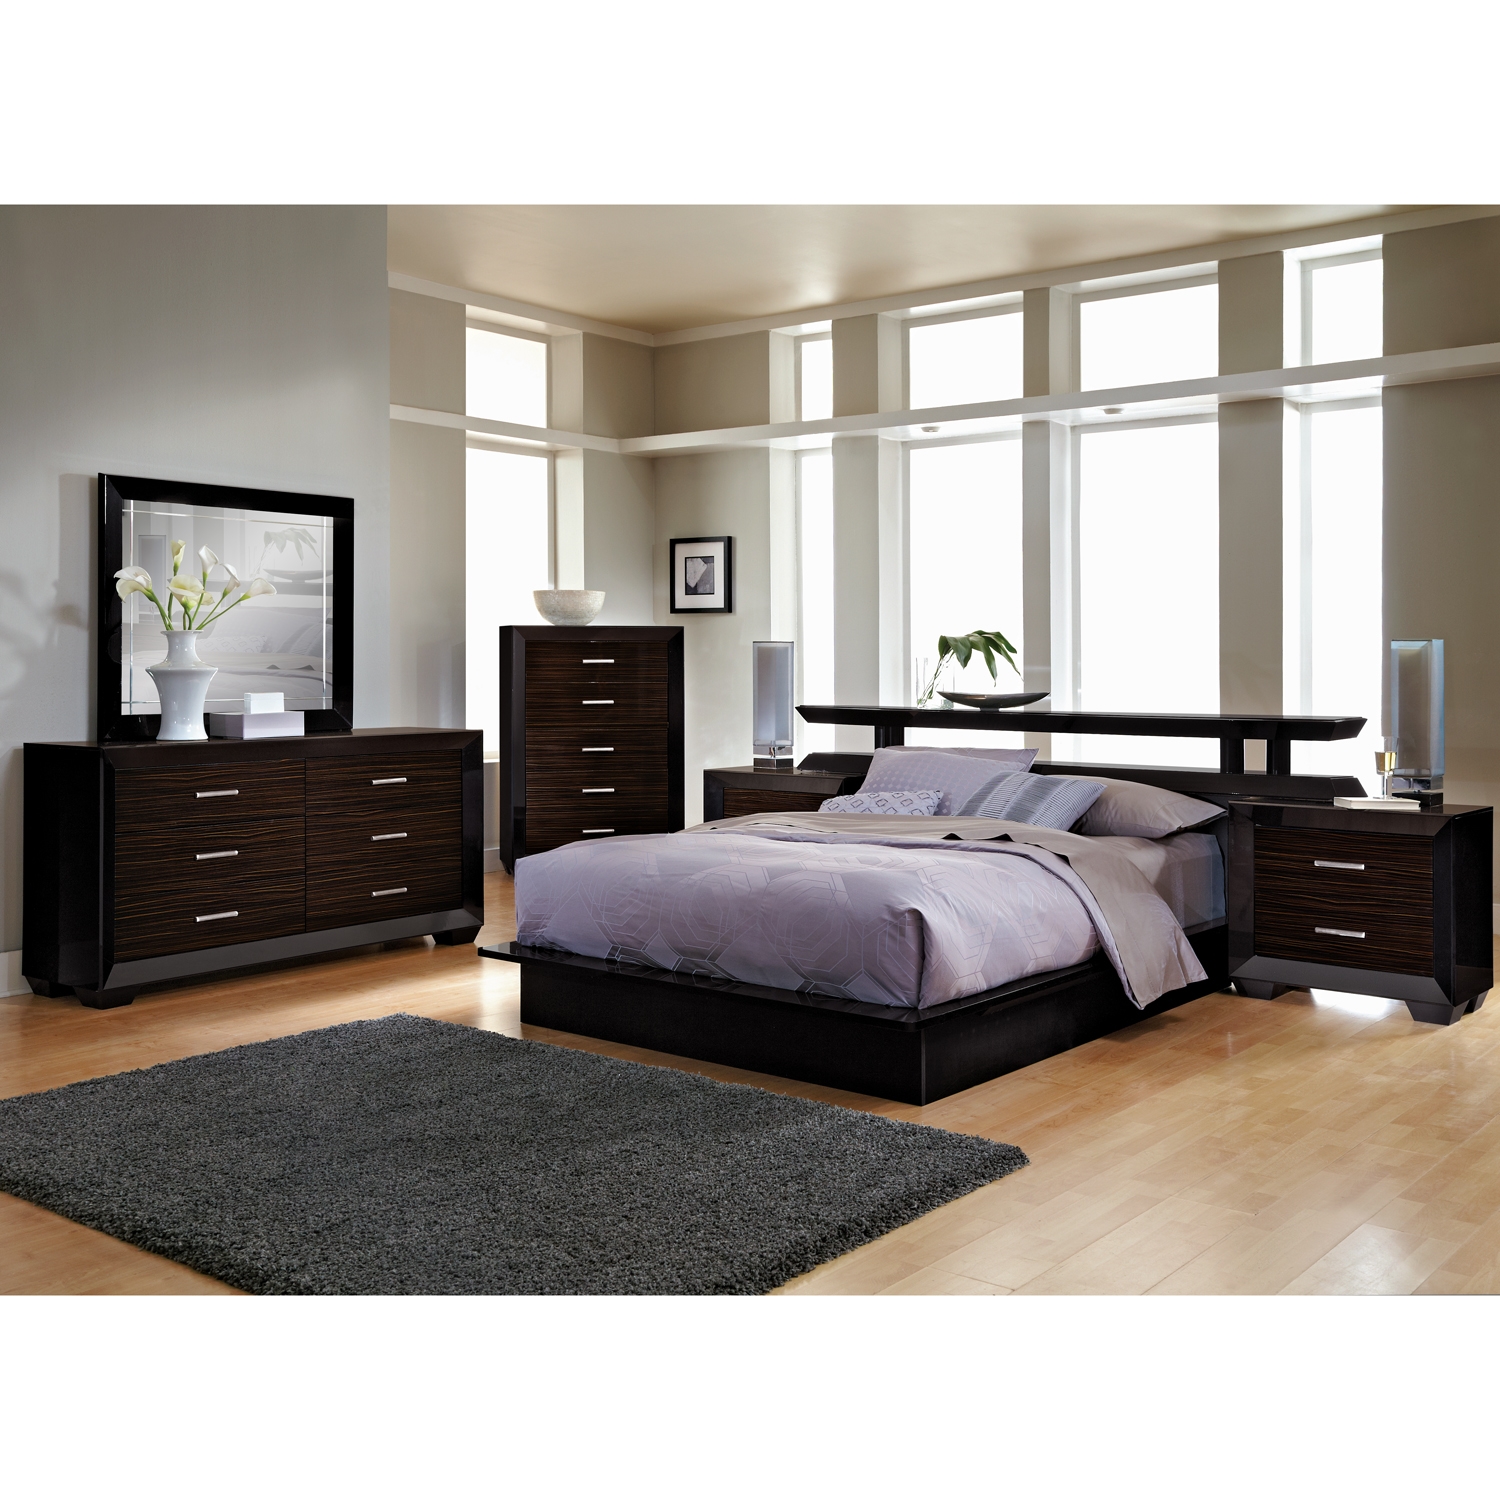 bedroom furniture sets with mattress photo - 7